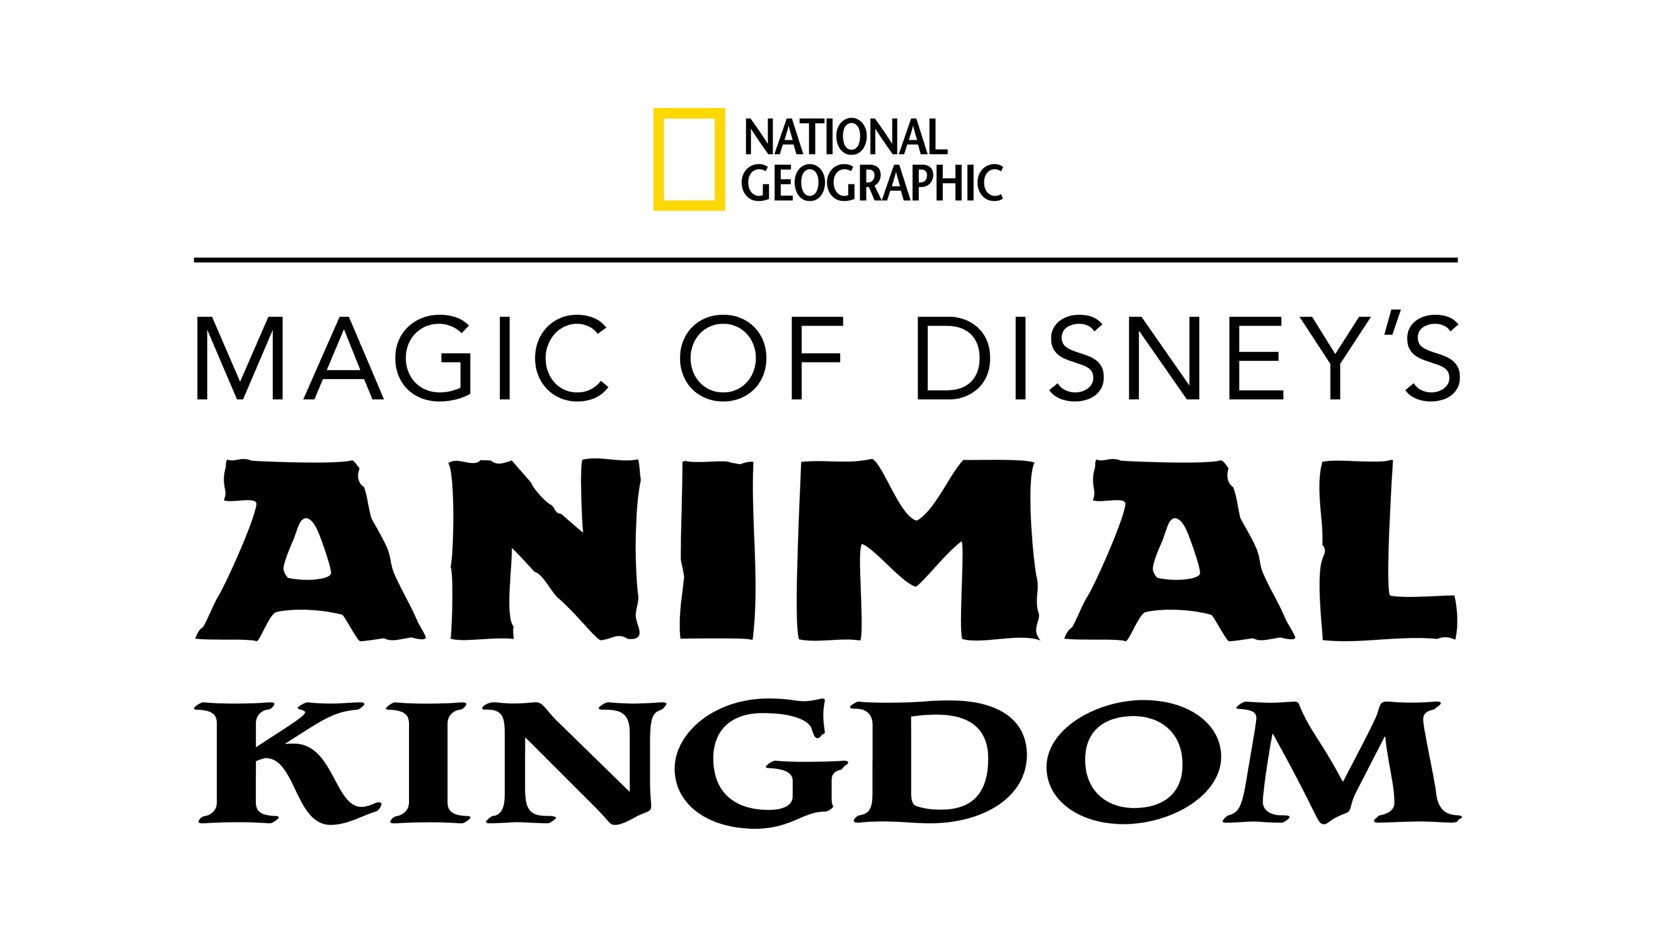 Disney+ to premiere “Magic of Disney’s Animal Kingdom” from National Geographic on September 25